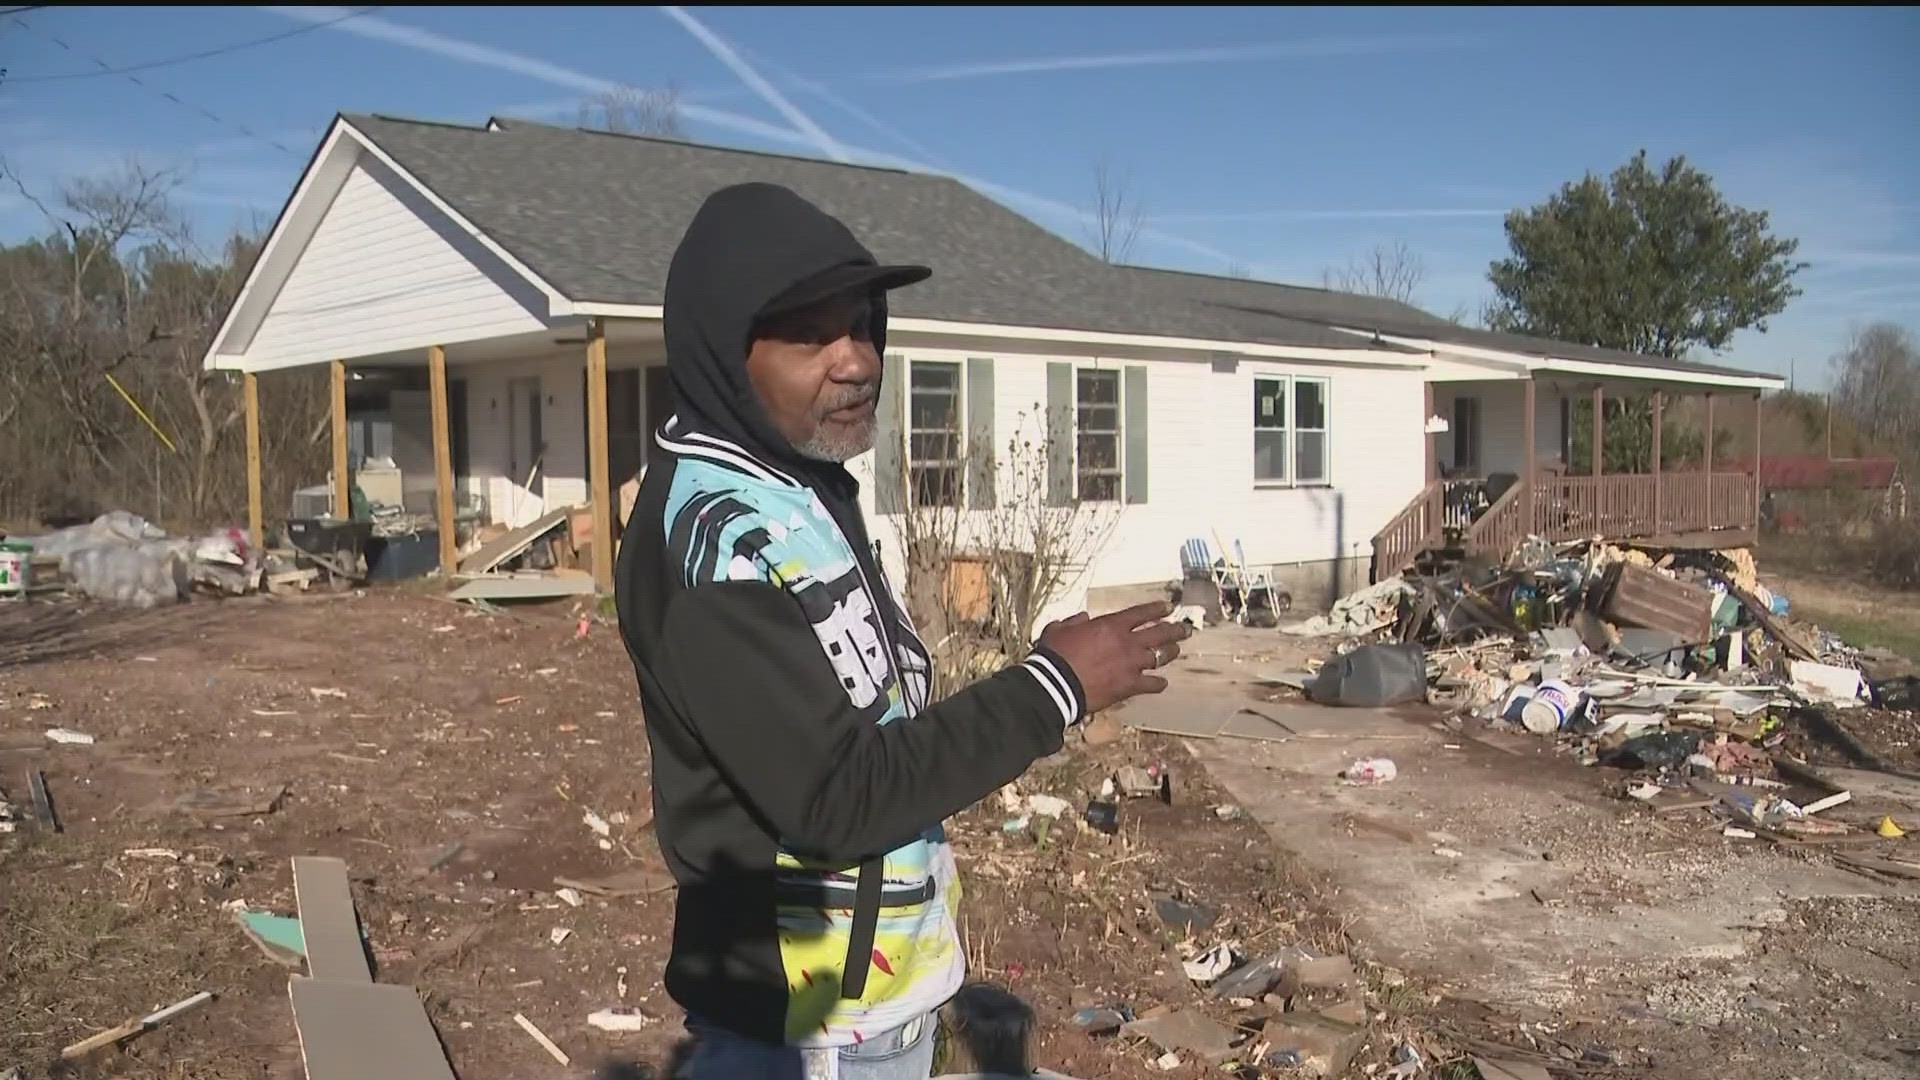 A man said he's still waiting to get back inside a home that's been in his family for more than 50 years.